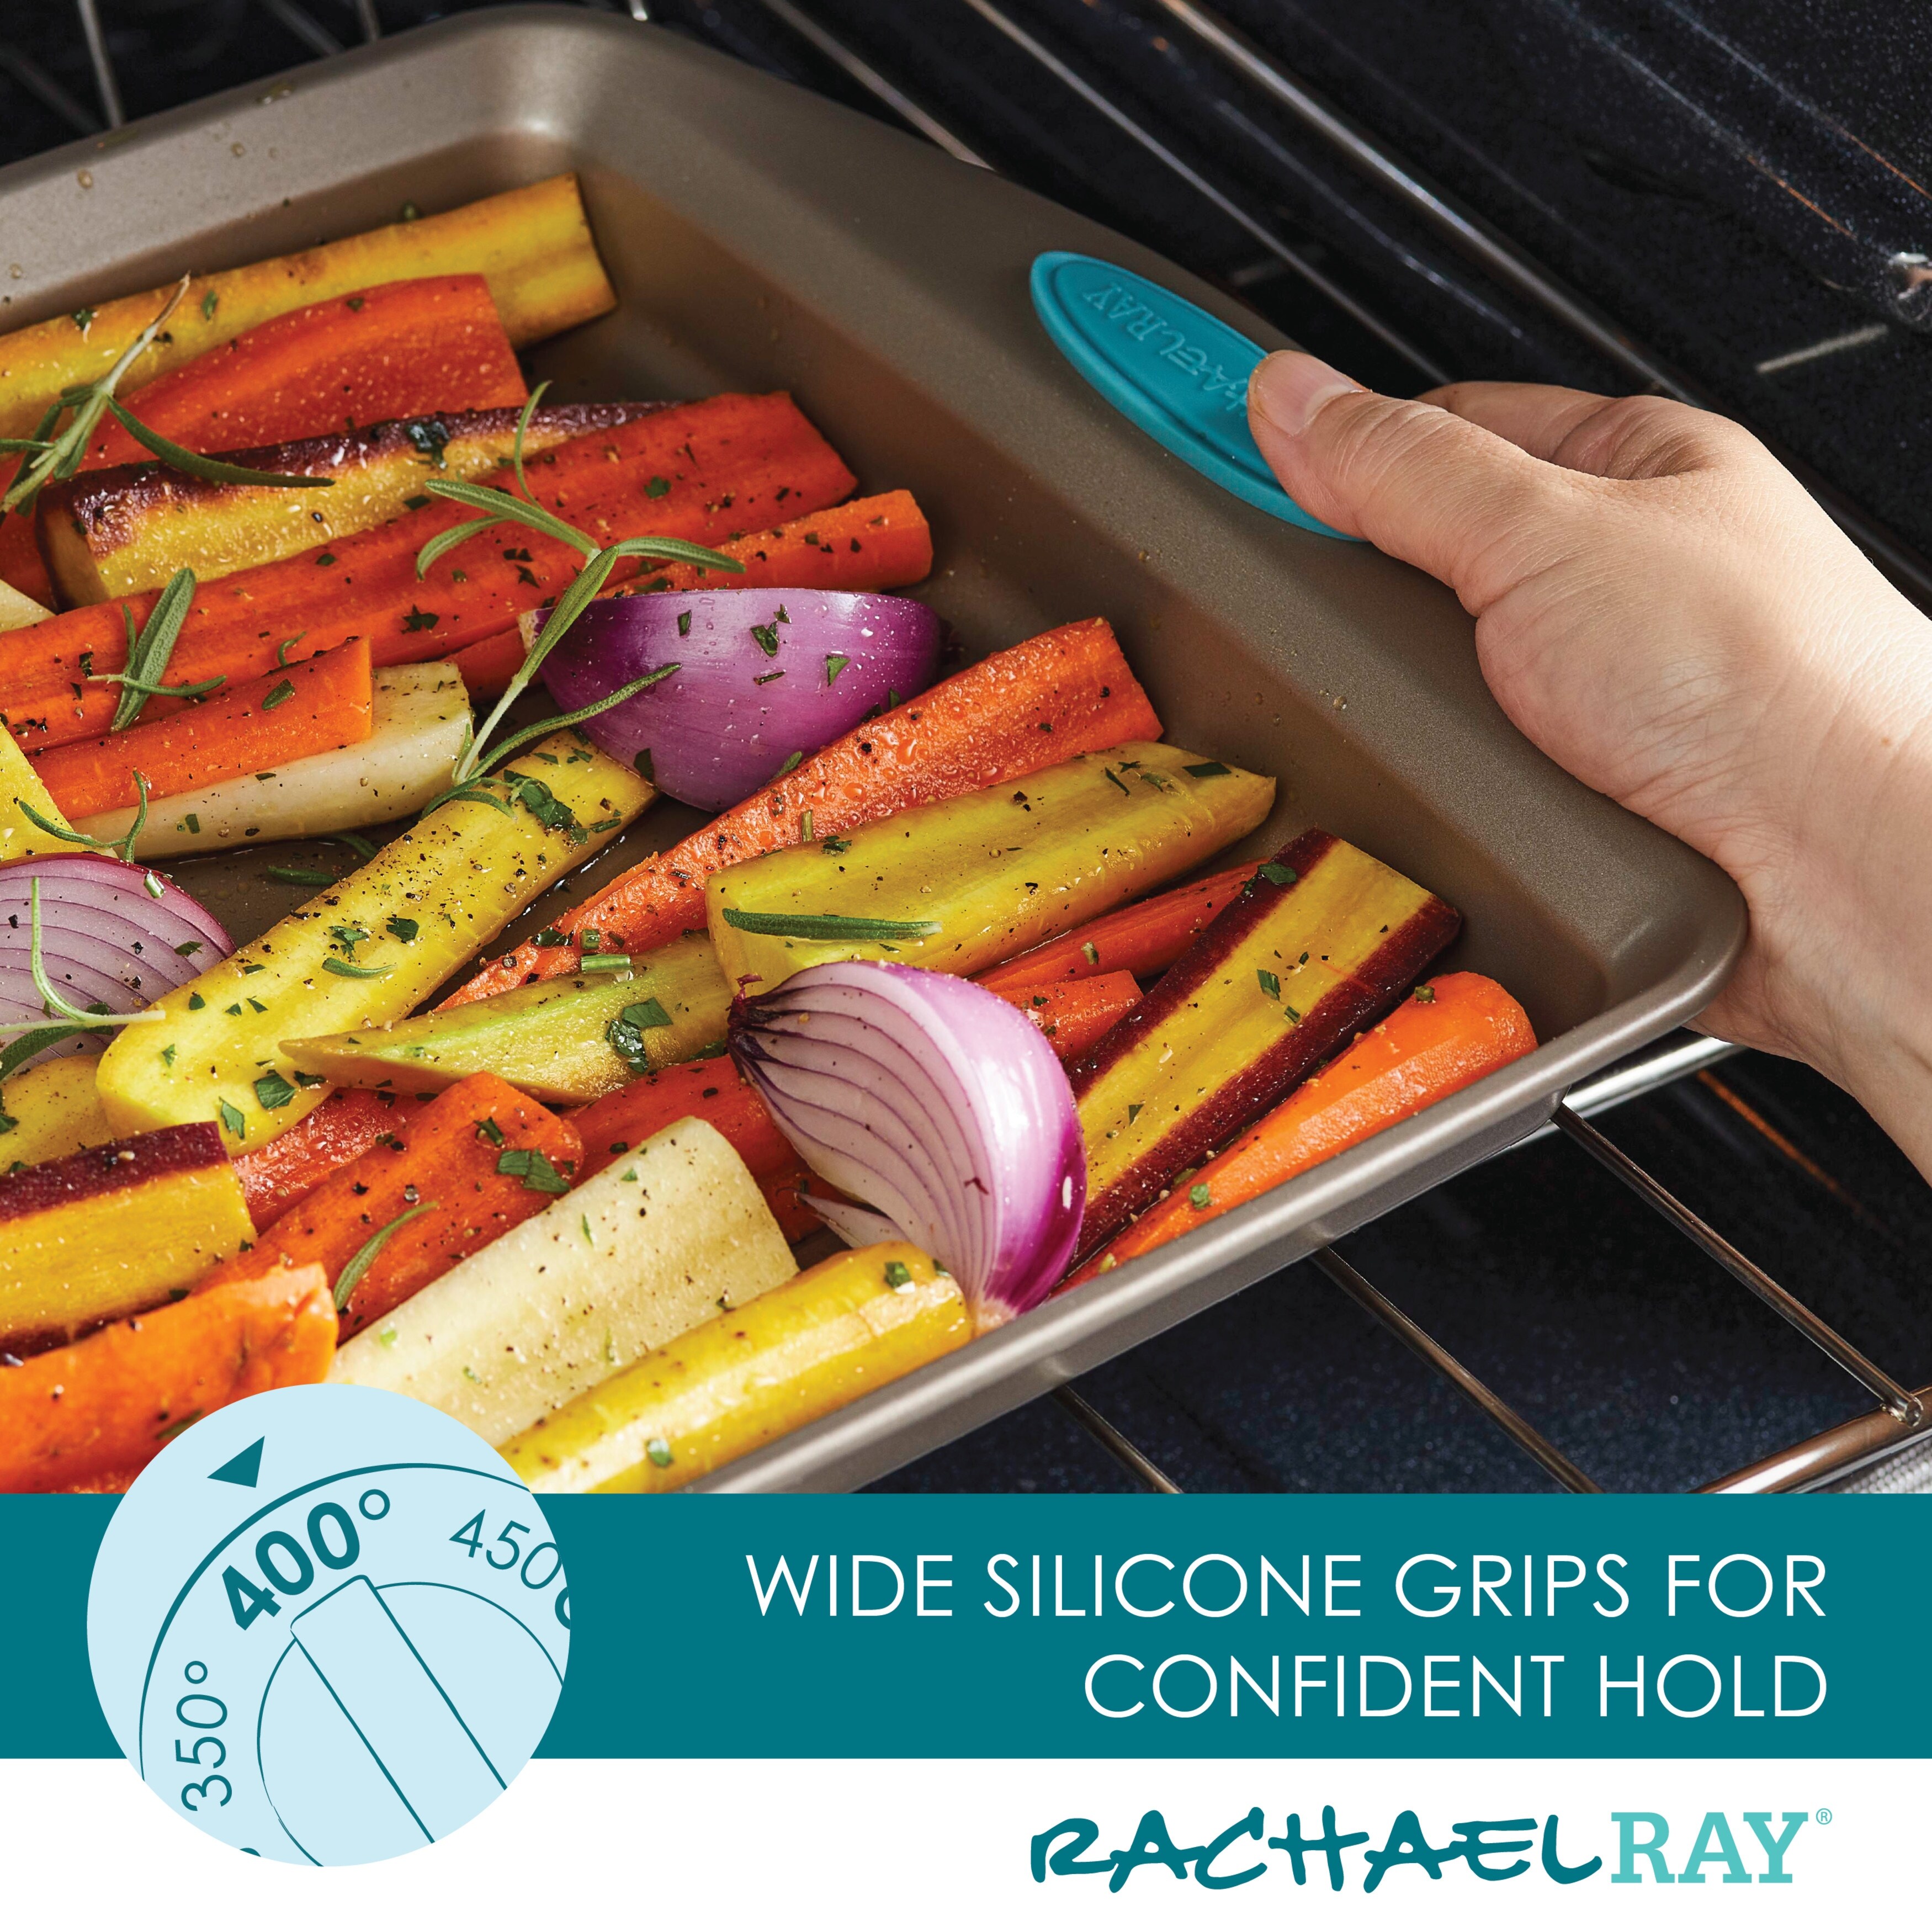 https://ak1.ostkcdn.com/images/products/is/images/direct/00d230709b13d11fab3f6cf4a6a48ace39ed63d9/Rachael-Ray-Cucina-Nonstick-Bakeware-and-Tool-Set%2C-6-Piece%2C-Agave-Blue.jpg